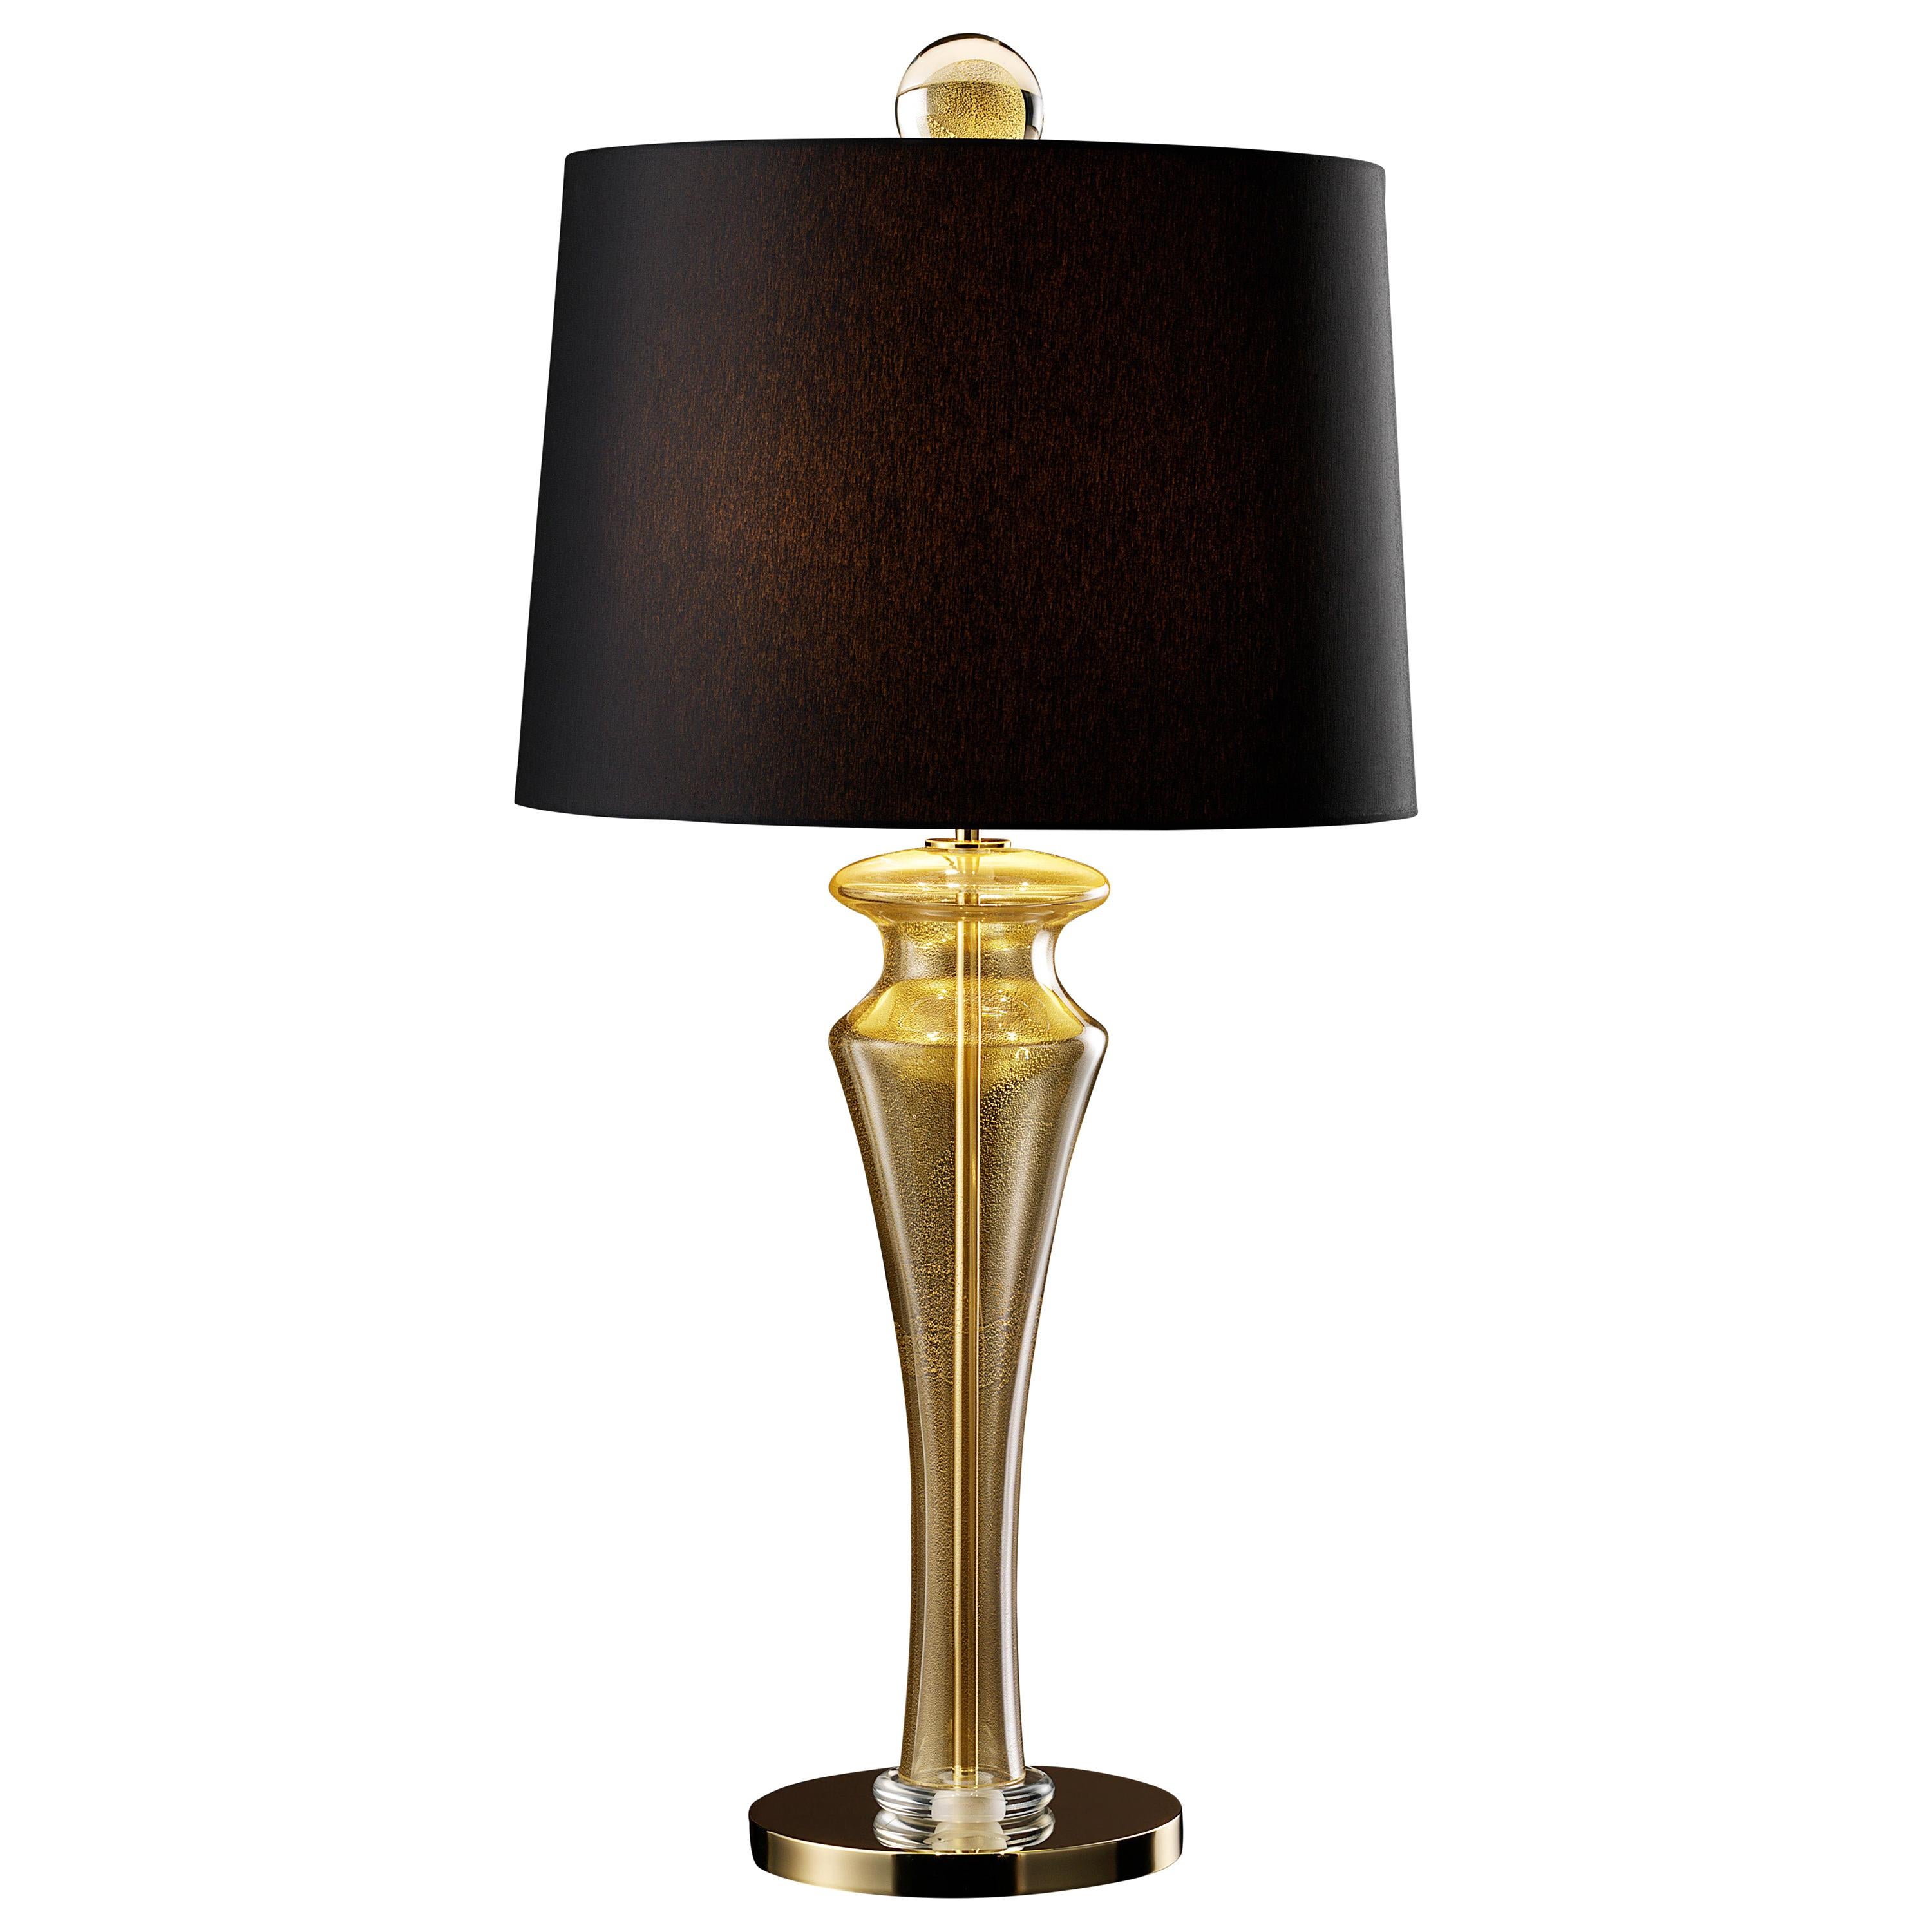 Gold (Gold_OO) Saint Germain 7067 Table Lamp in Glass with Black Shade, by Giorgia Brusemini